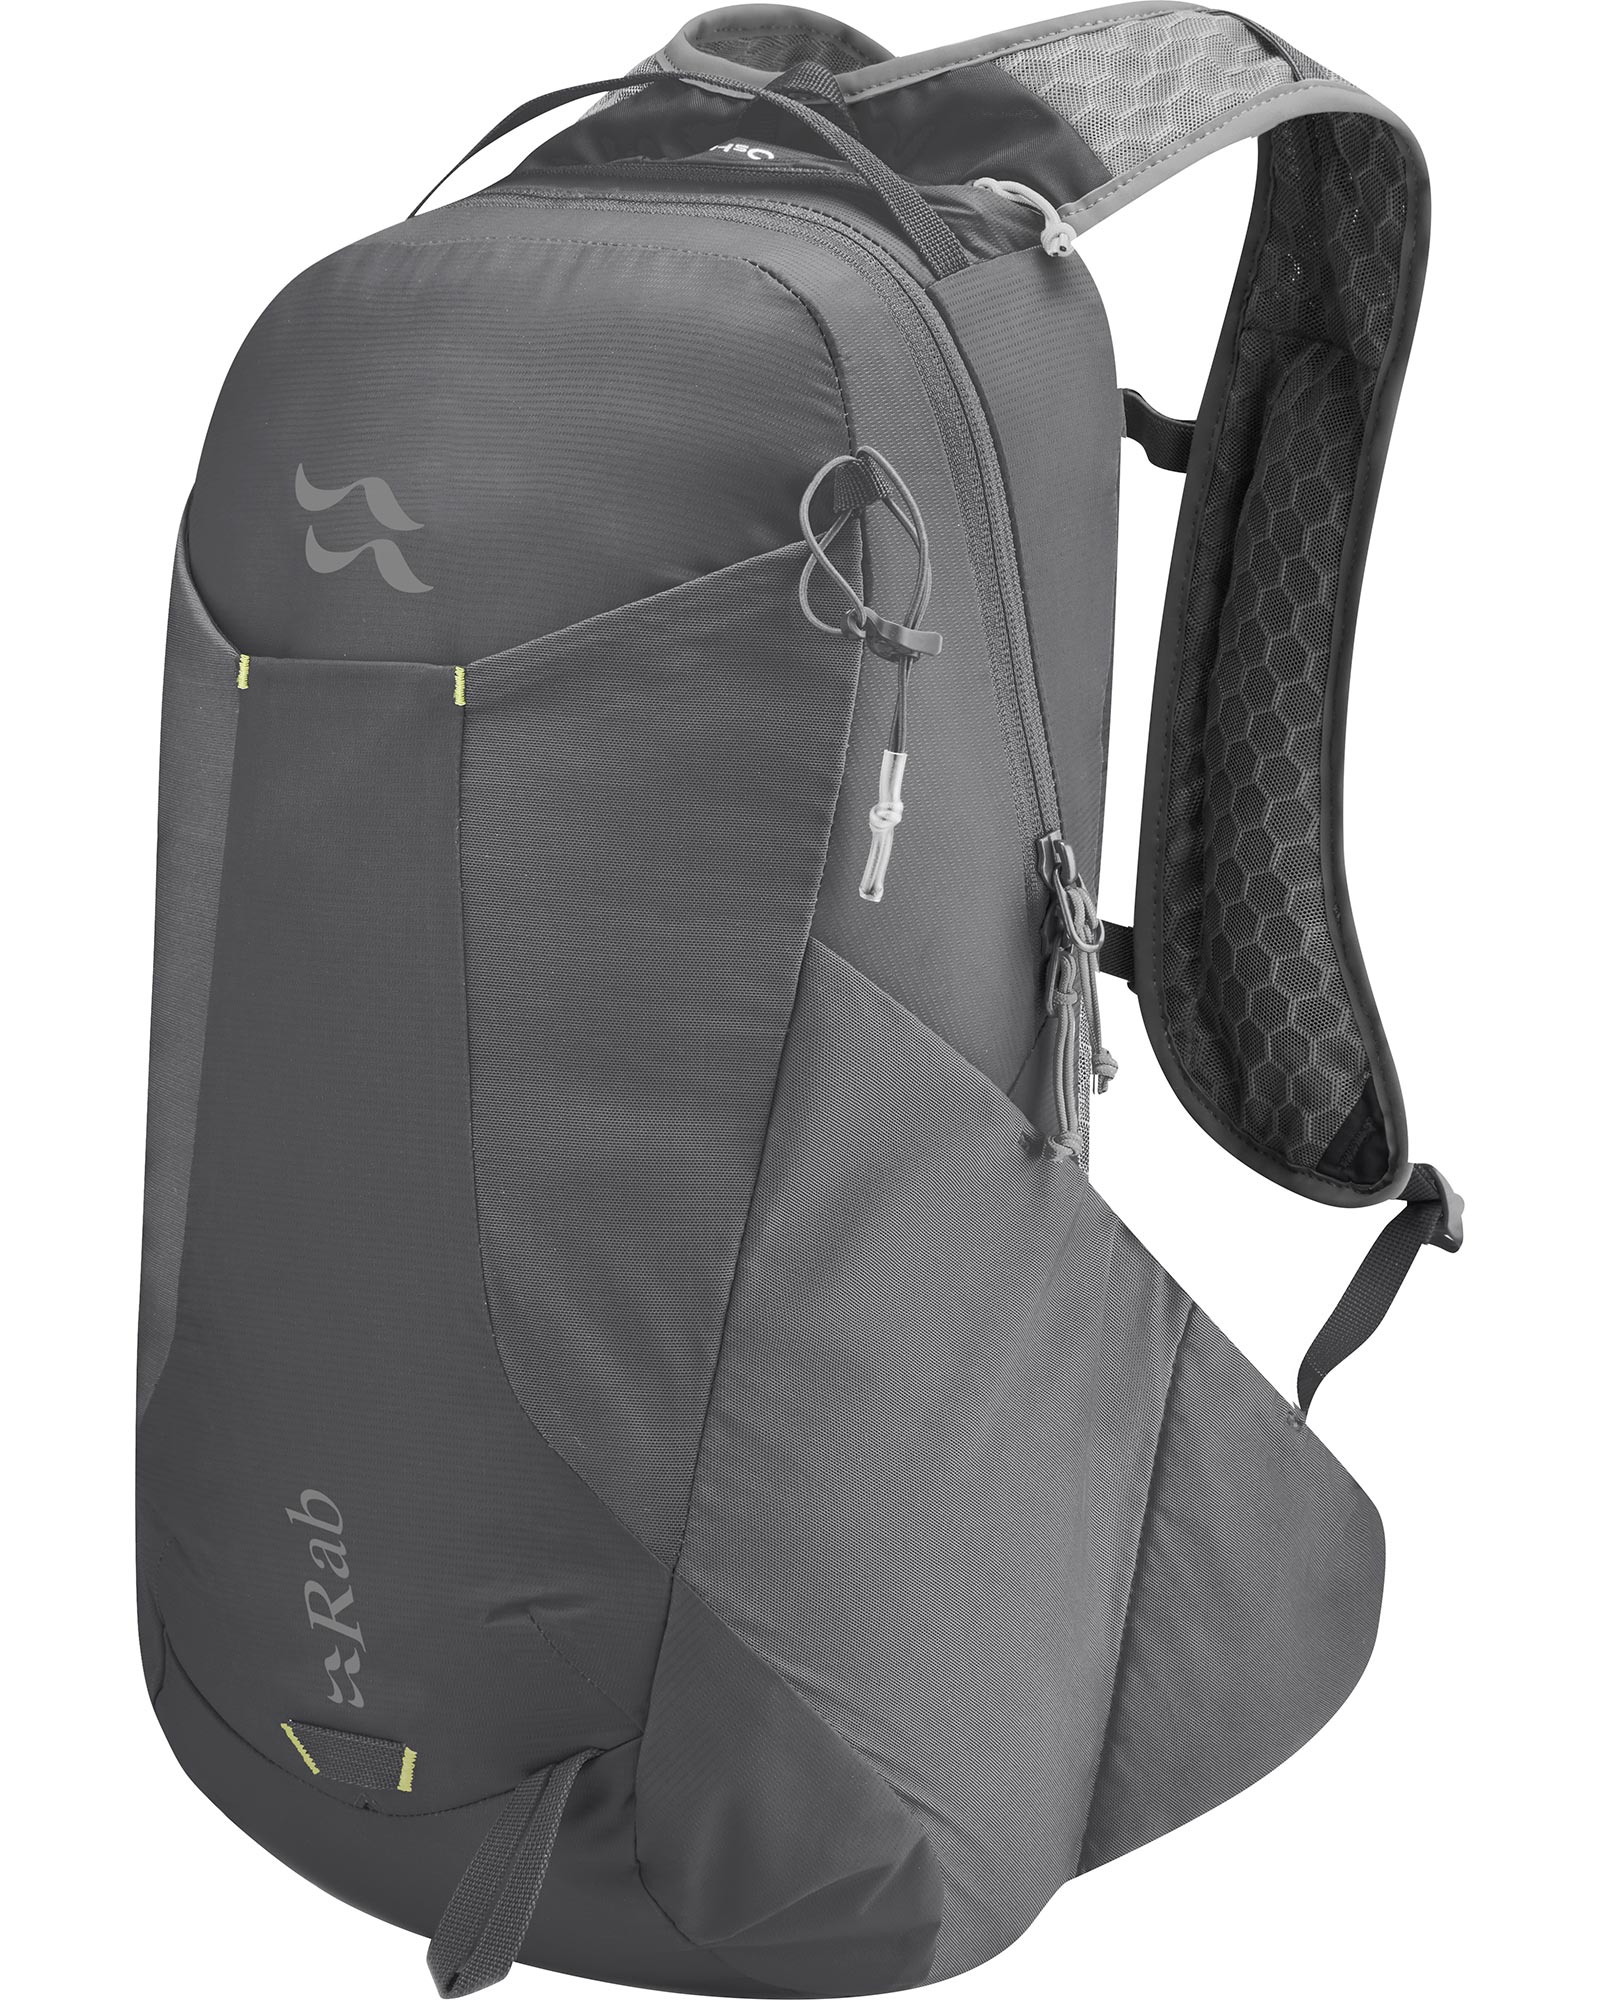 Rab Aeon LT 18 Backpack - Anthracite